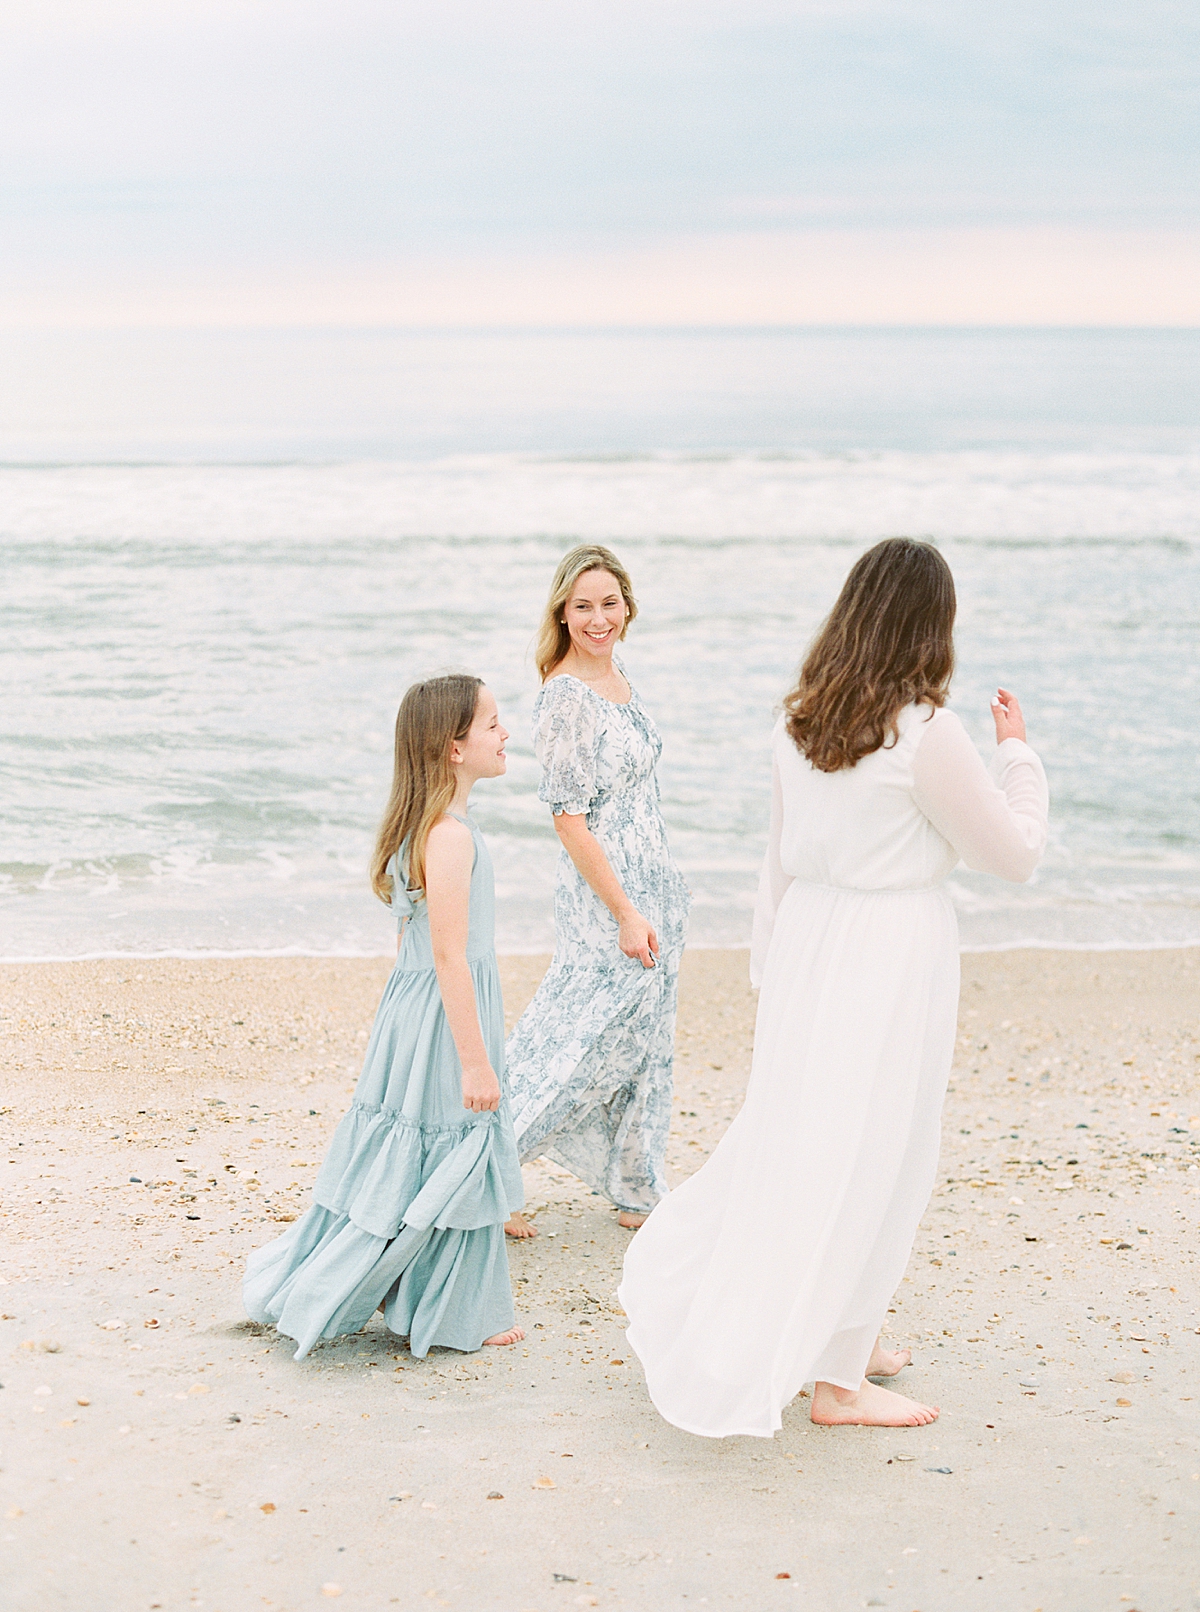 A Mom and her two daughters take beach family photos in Ponte Vedra, FL while wearing blue dresses.